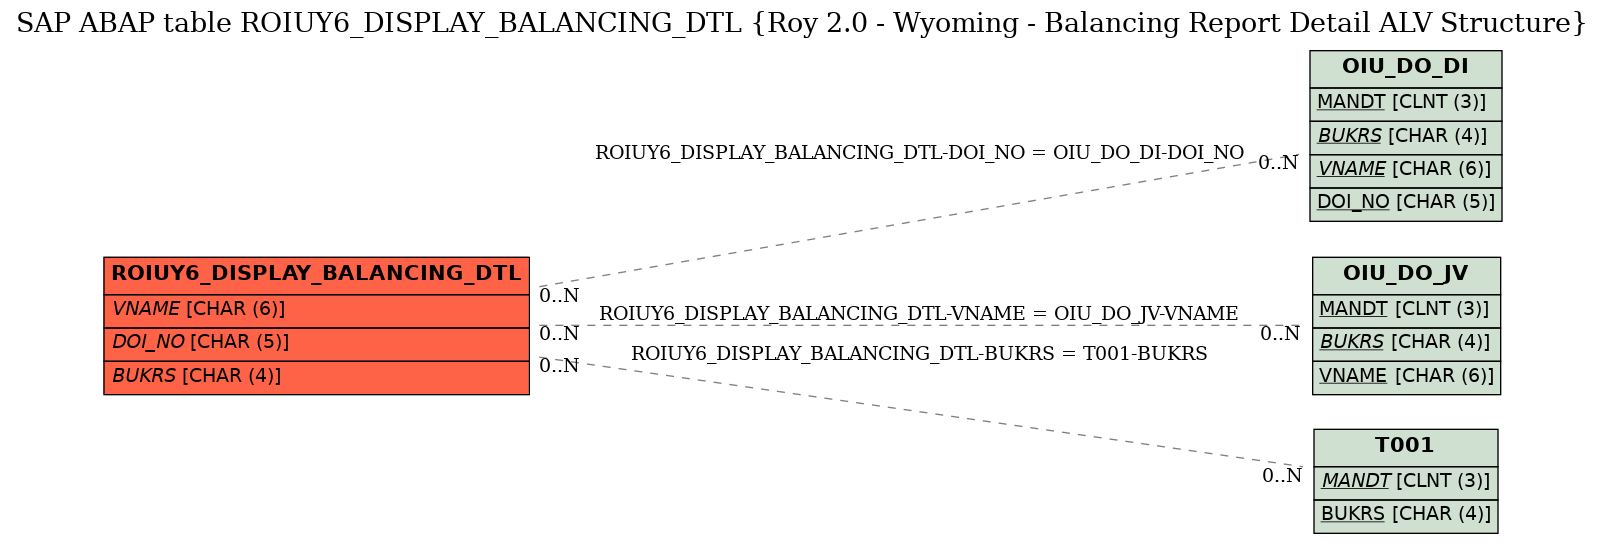 E-R Diagram for table ROIUY6_DISPLAY_BALANCING_DTL (Roy 2.0 - Wyoming - Balancing Report Detail ALV Structure)